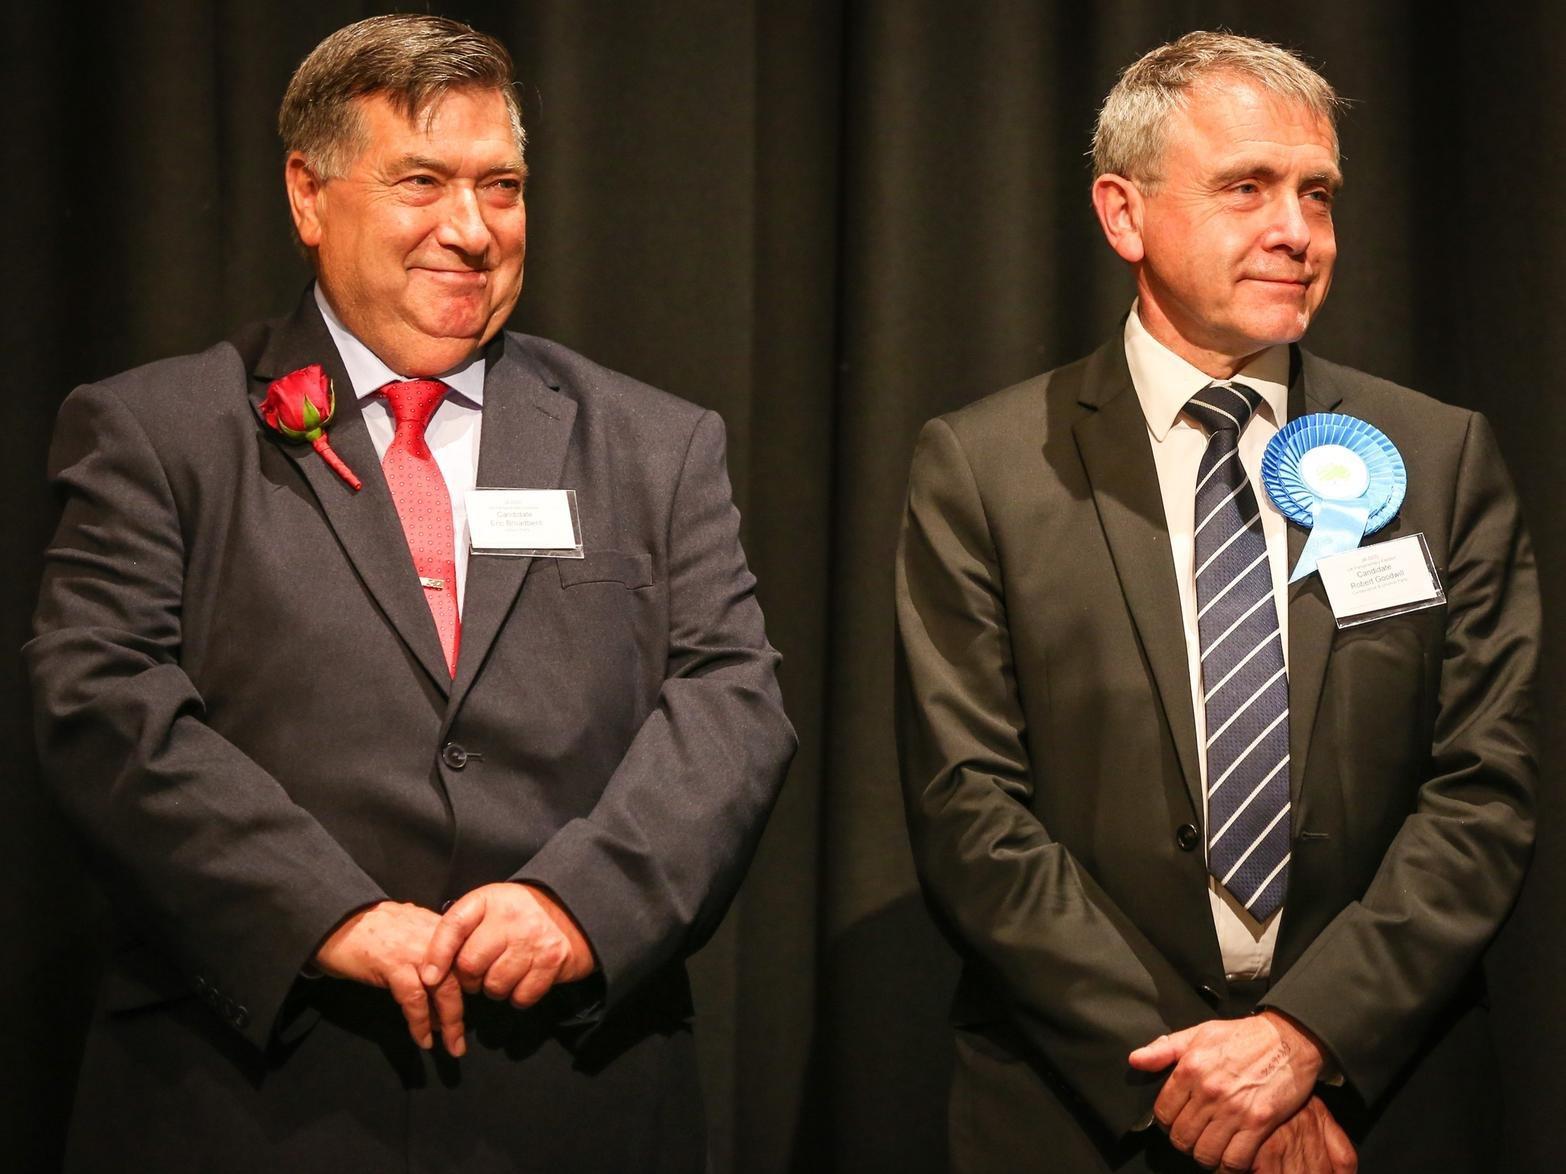 Labour's Eric Broadbent and Conservative Robert Goodwill on stage for the count results at Scarborough Spa. Mr Goodwill was elected MP for the fourth time.